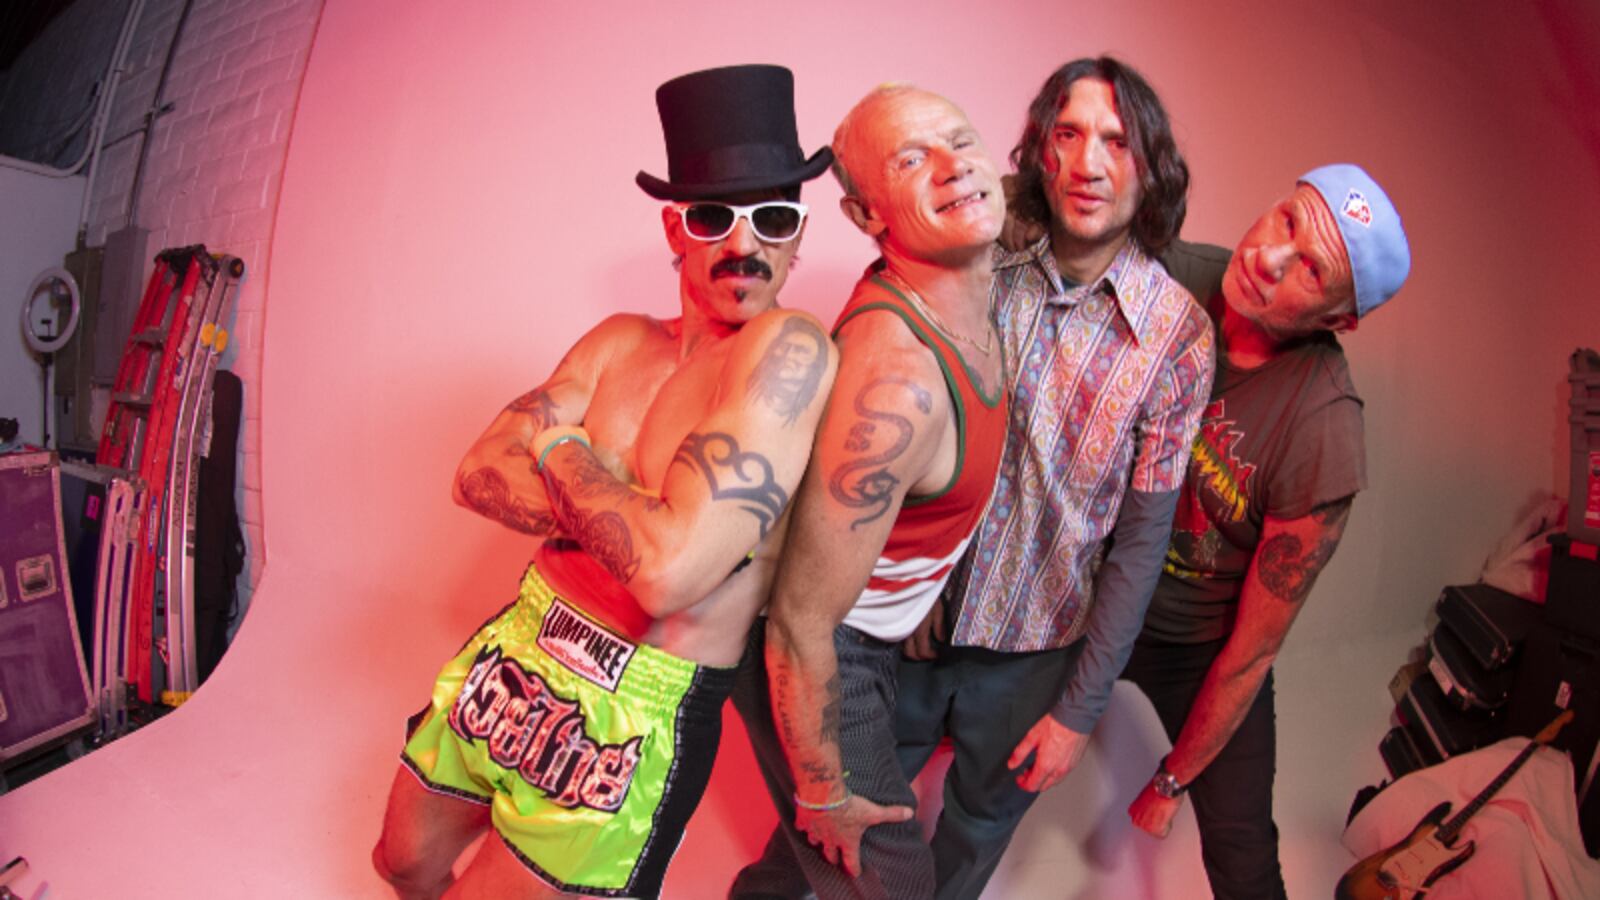 The band members of The Red Hot Chili Peppers.